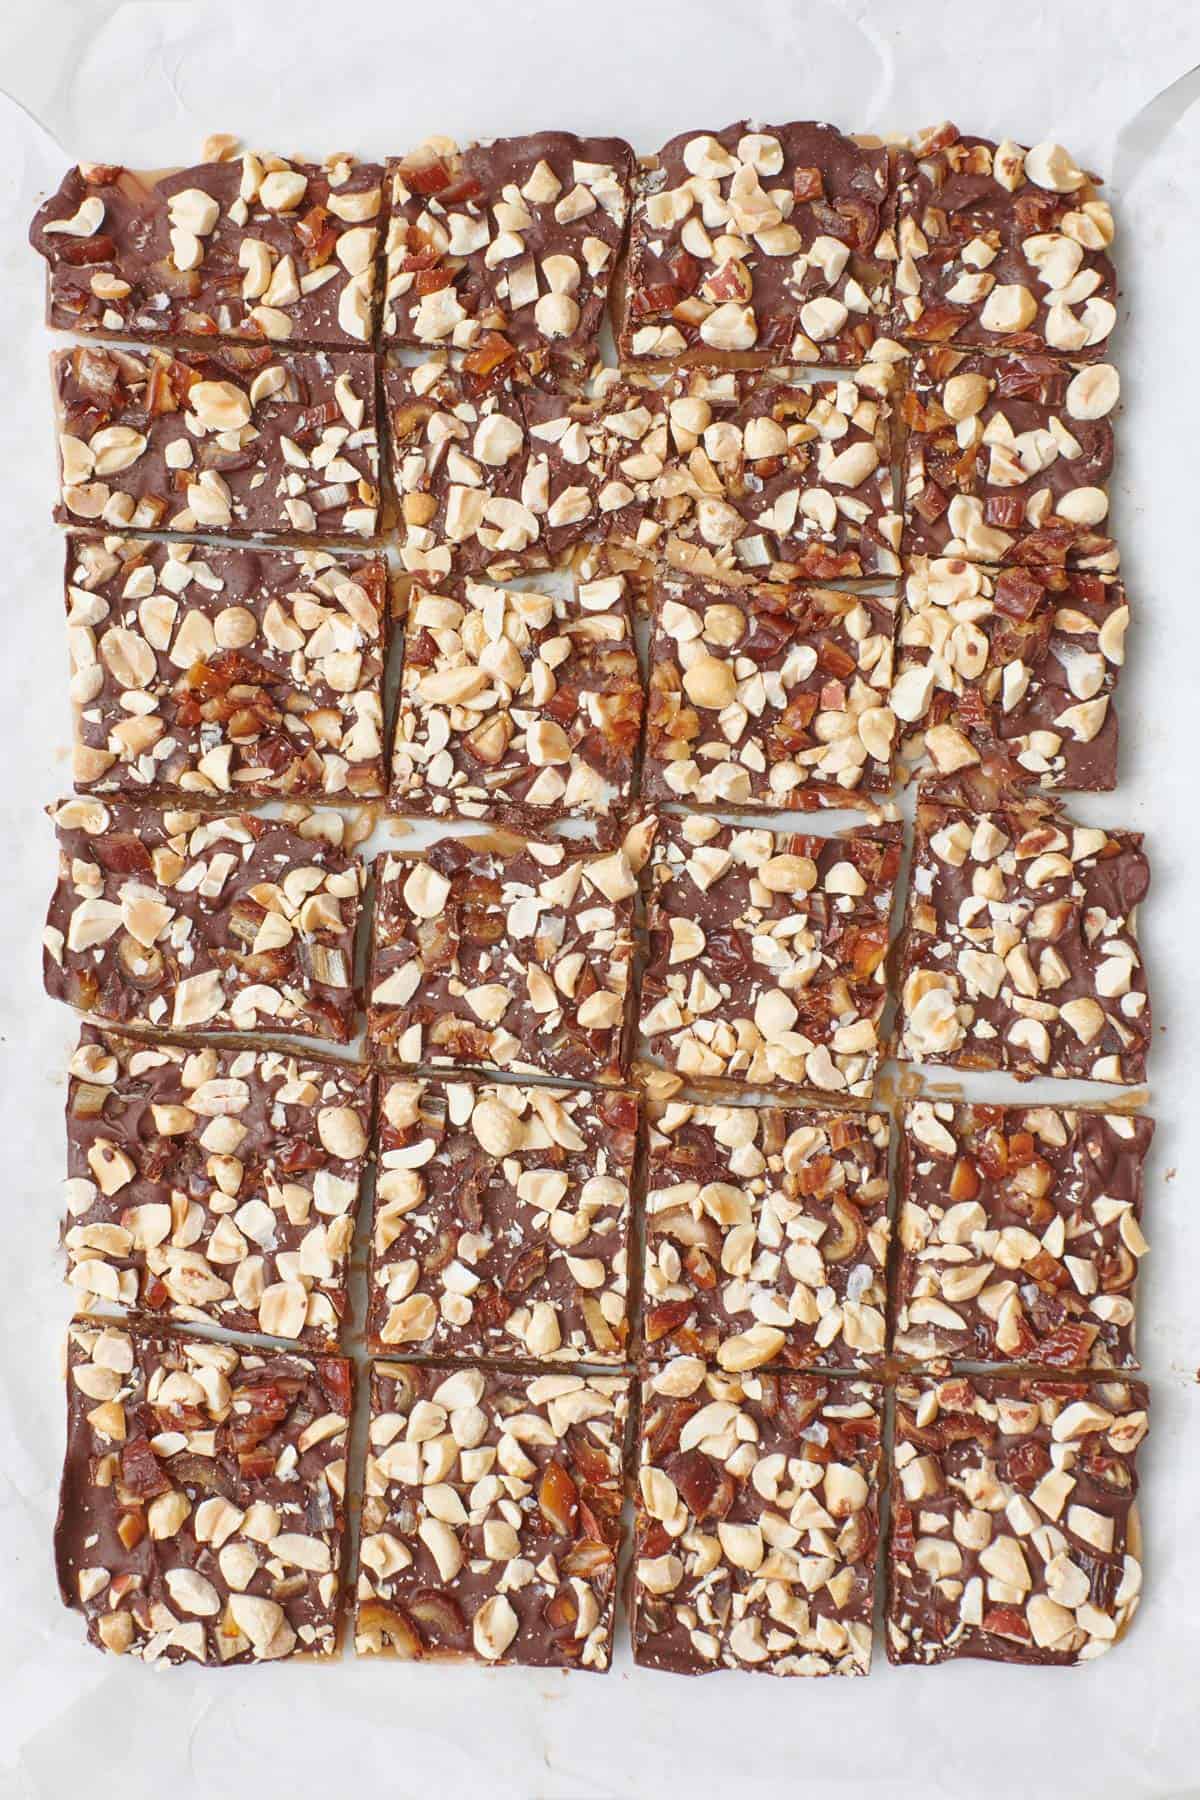 Peanut and chopped date covered homemade toffee cut into squares on parchment paper.